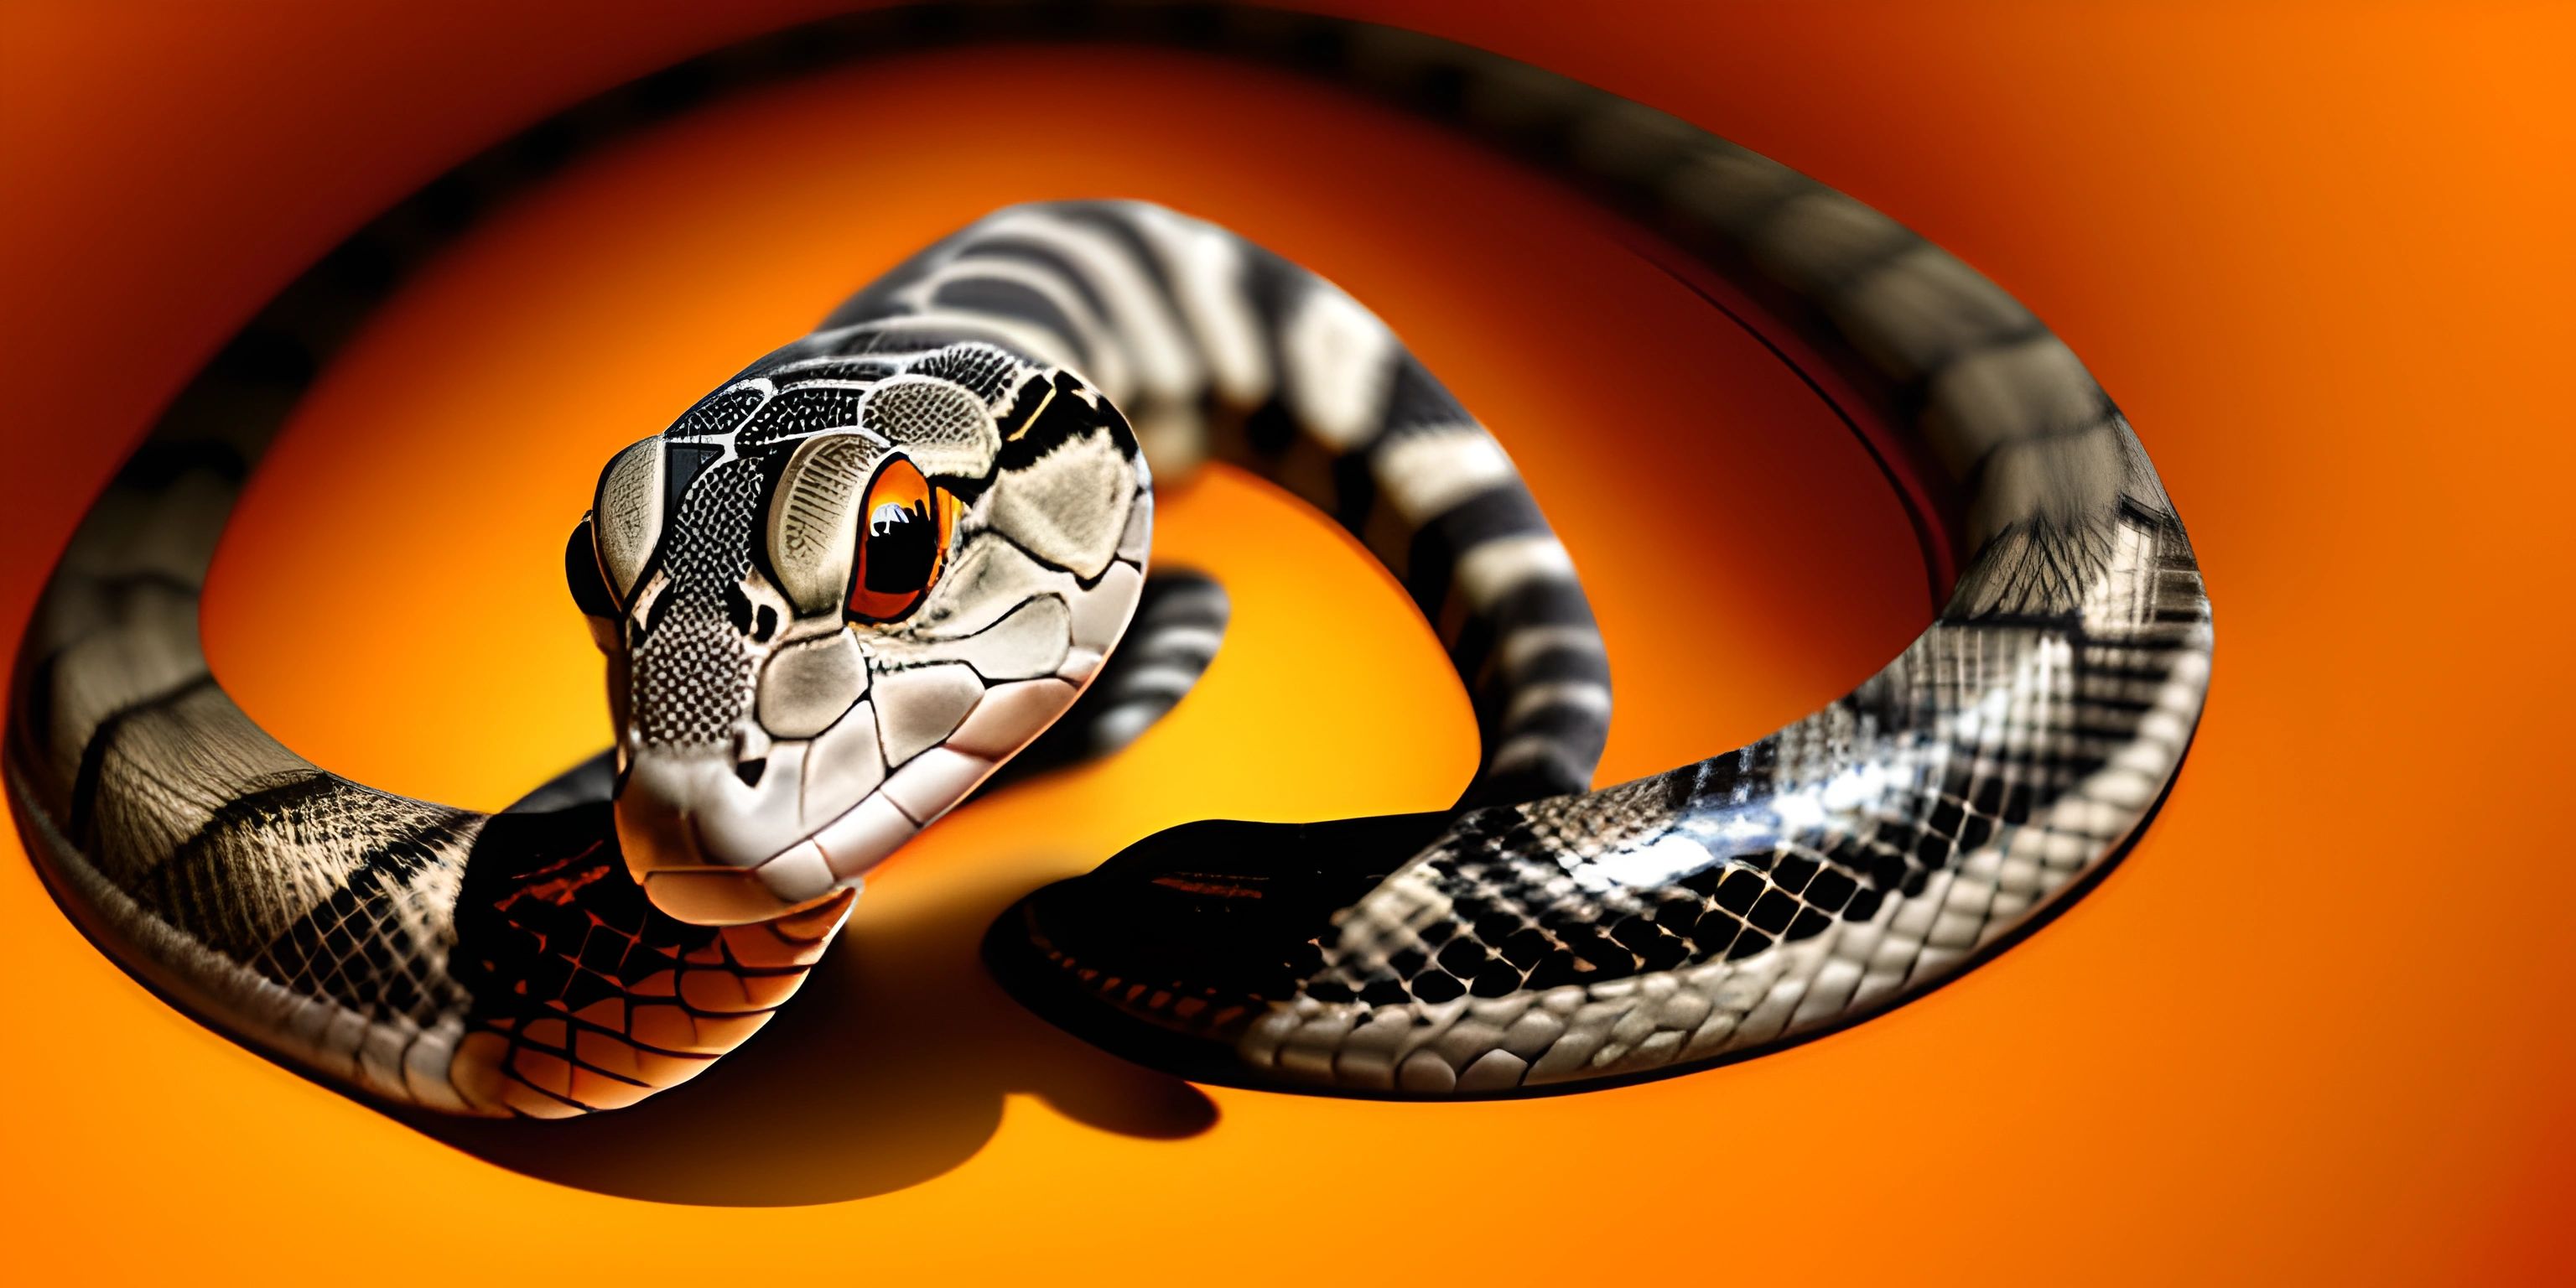 a snake's head sticking its tongue out from the middle of a black and white snake